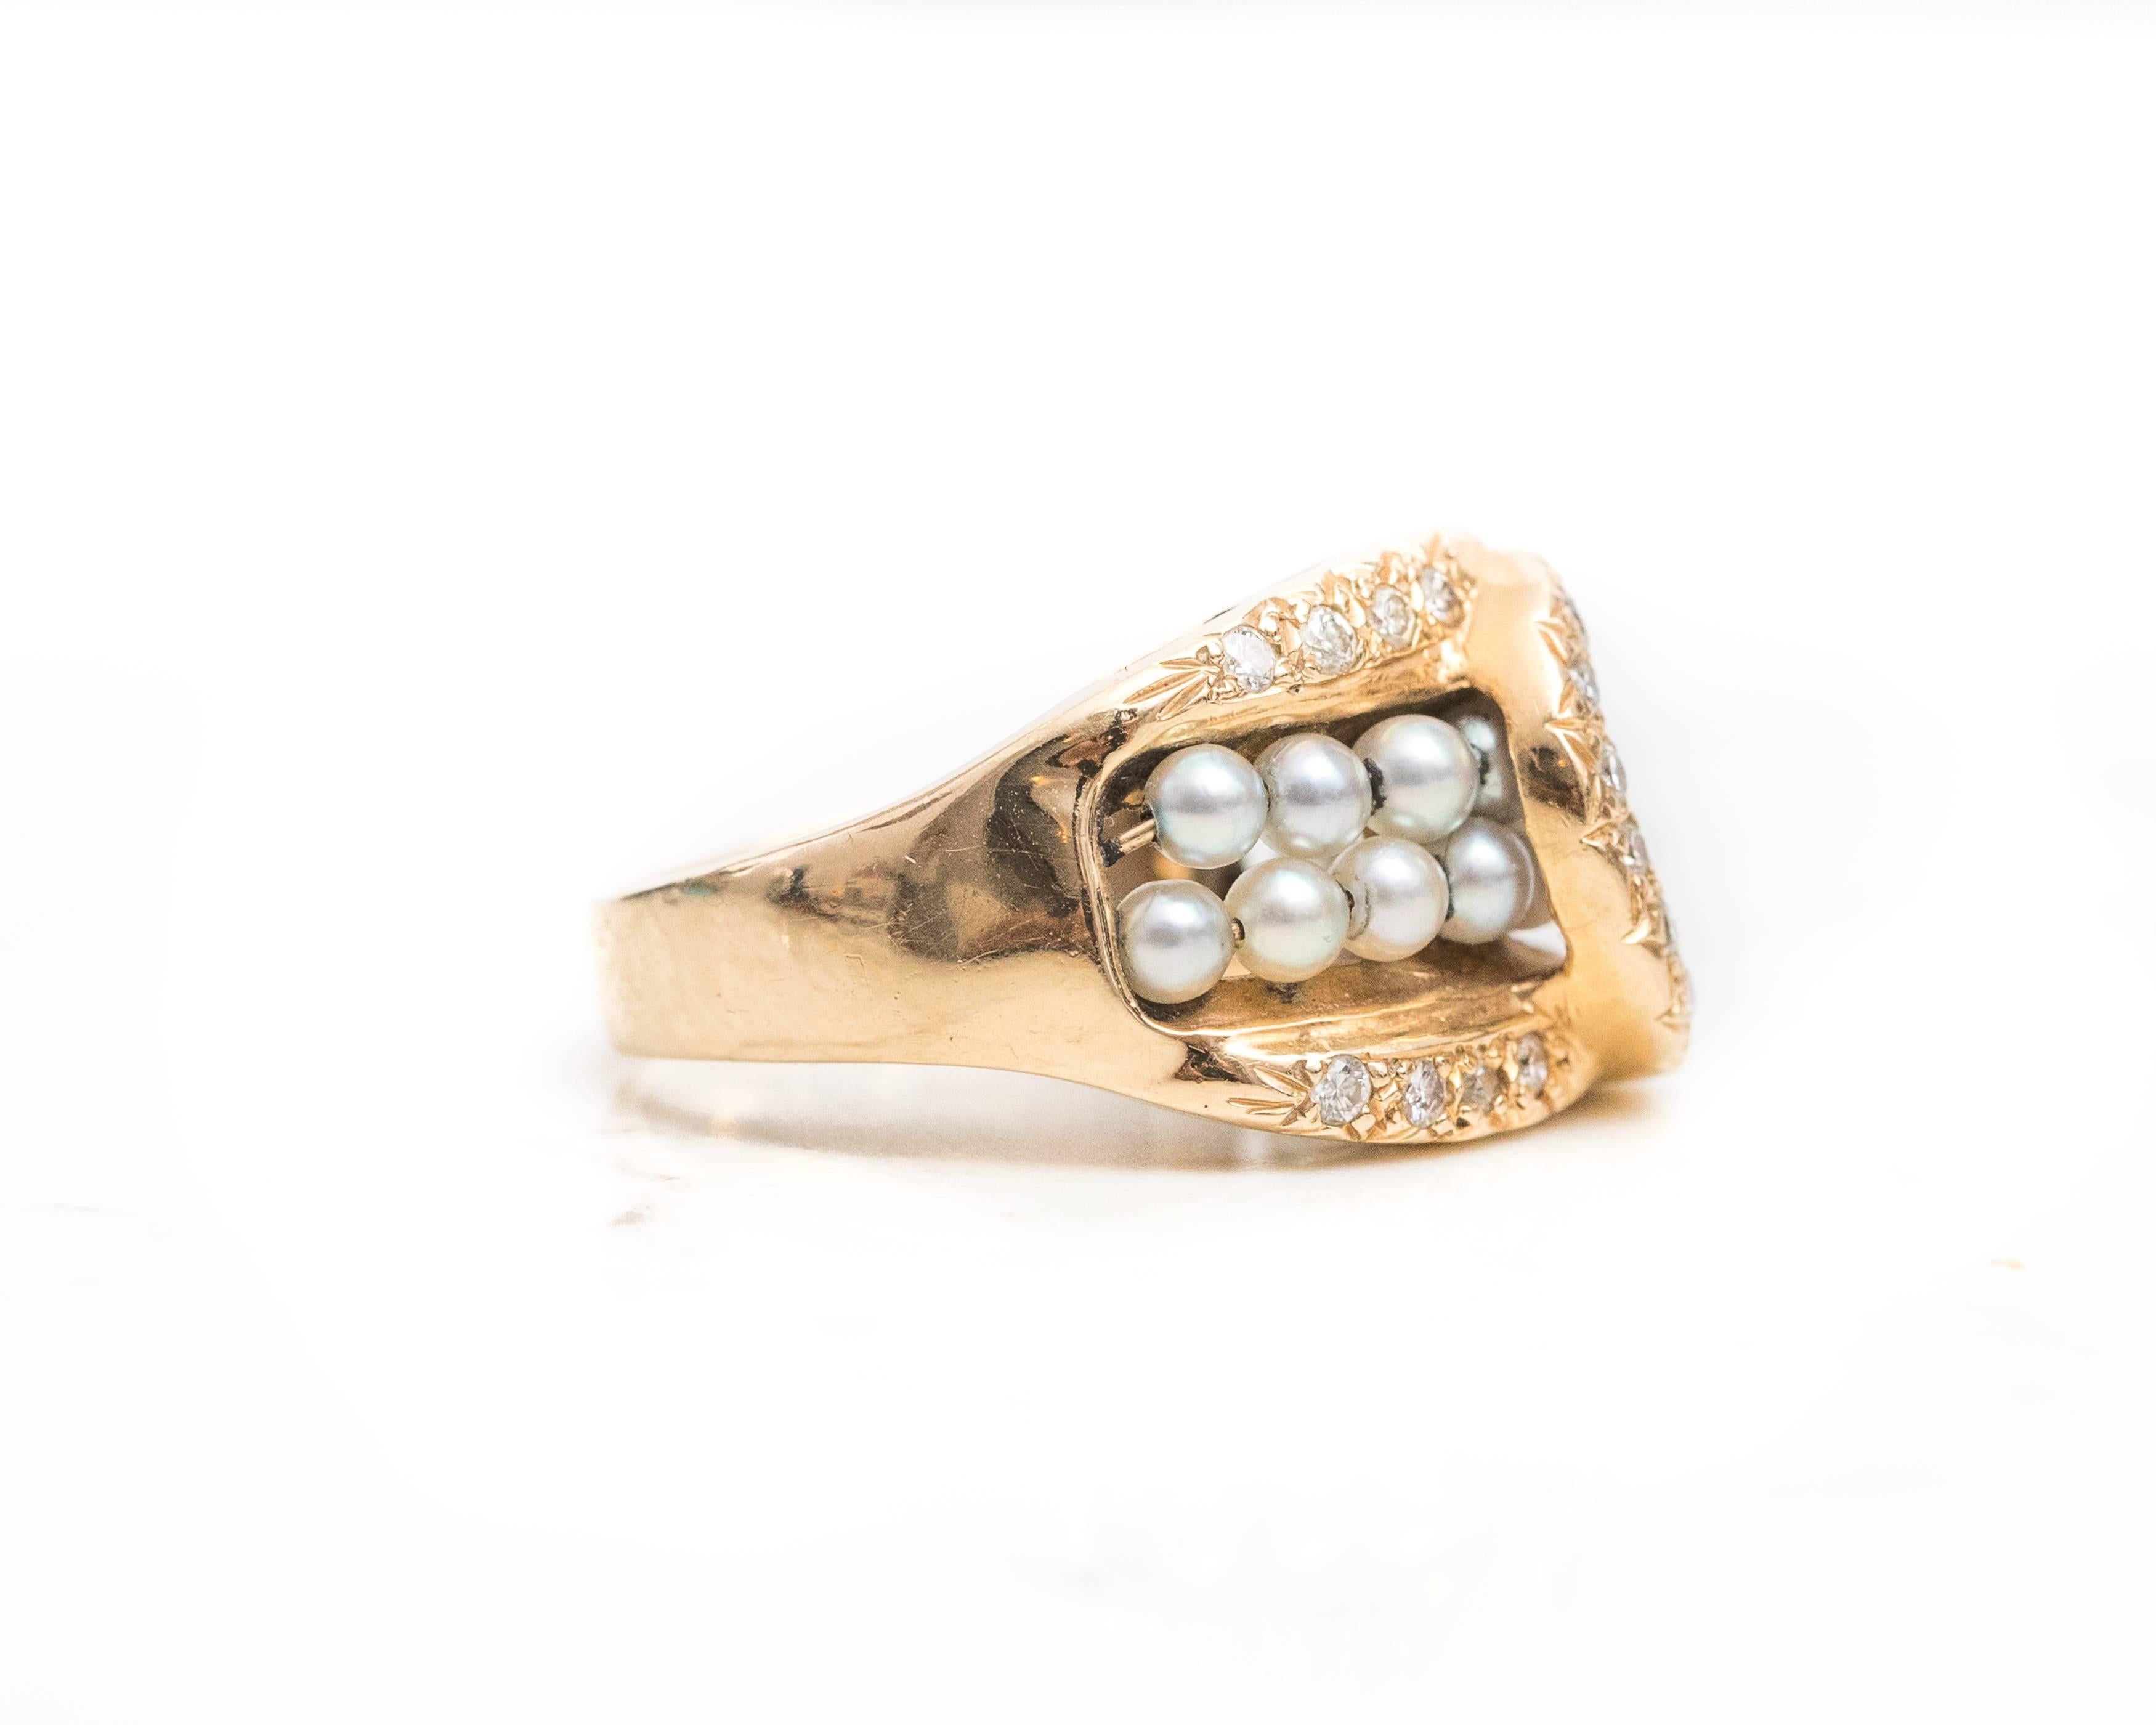 Belt Buckle Motif Ring - 14 Karat Yellow Gold, Silver Pearls, Diamonds

Features a crossover belt buckle design. Two rows of silvery grey round pearls are suspended horizontally along the ring front. They are bordered by a 14 Karat Yellow Gold frame